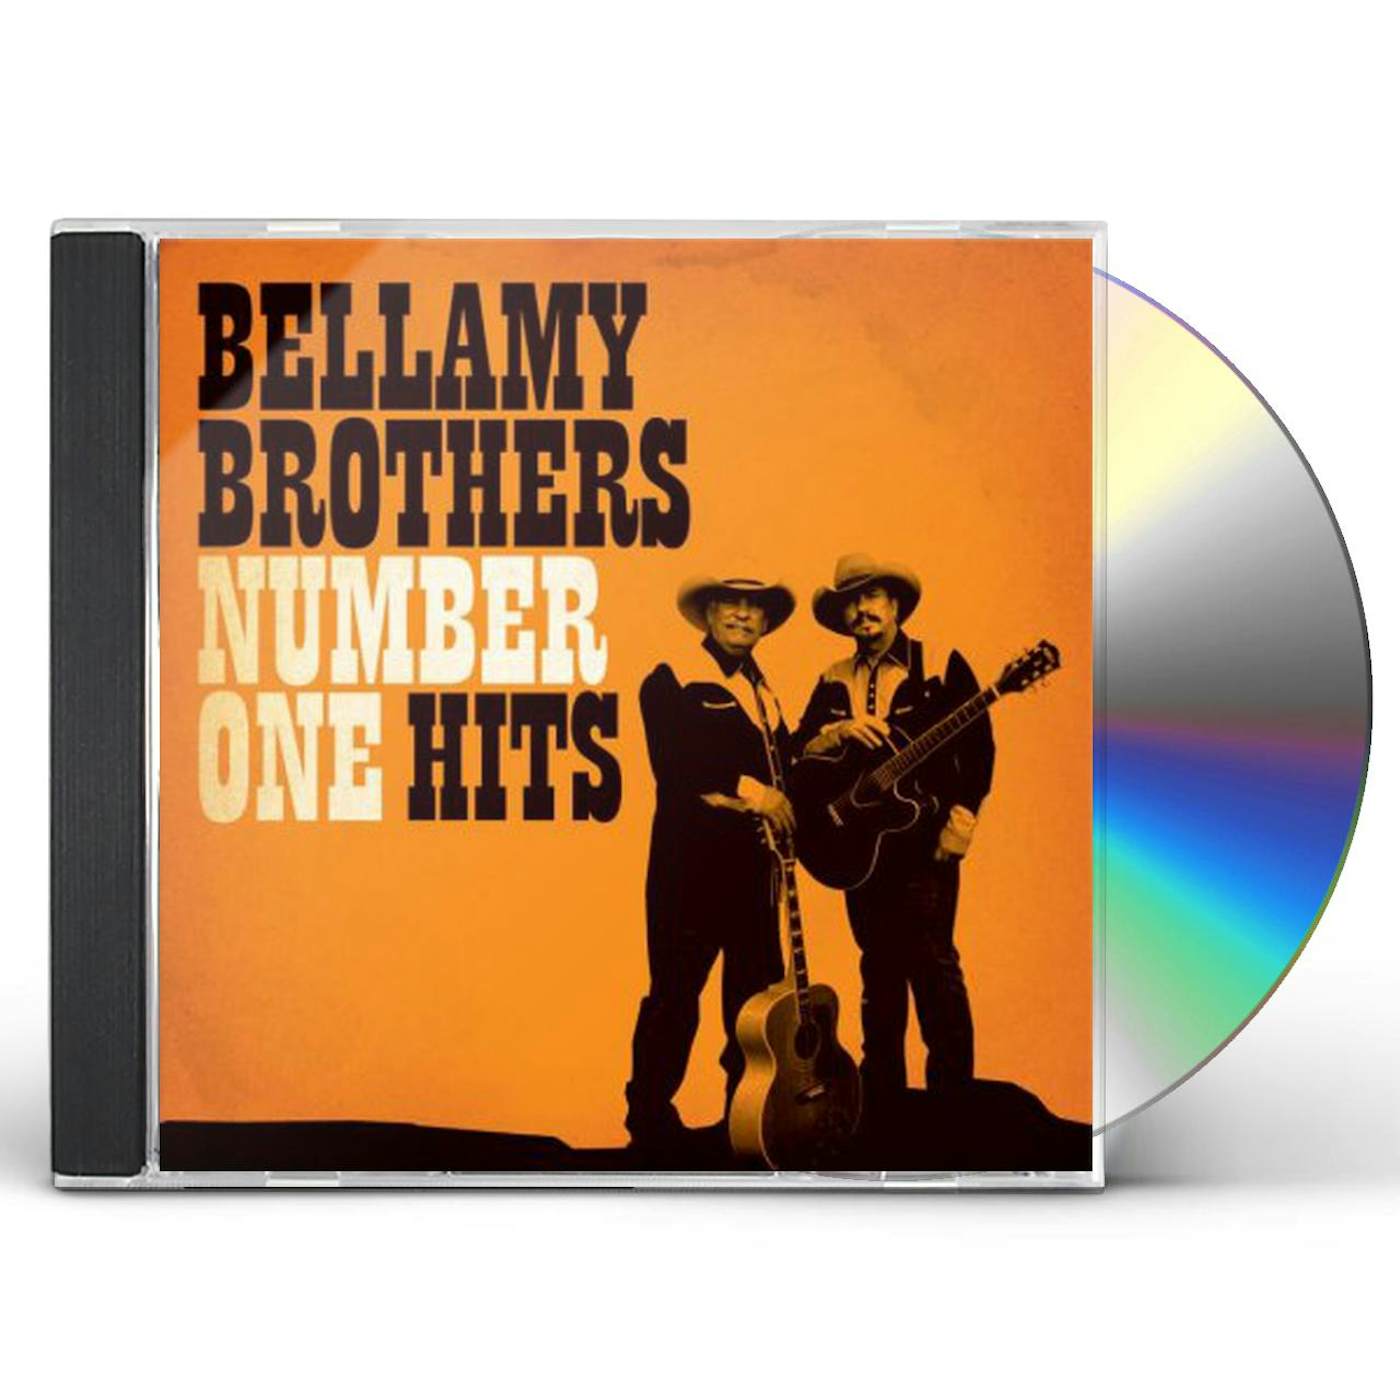 The Bellamy Brothers NUMBER ONE HITS CD